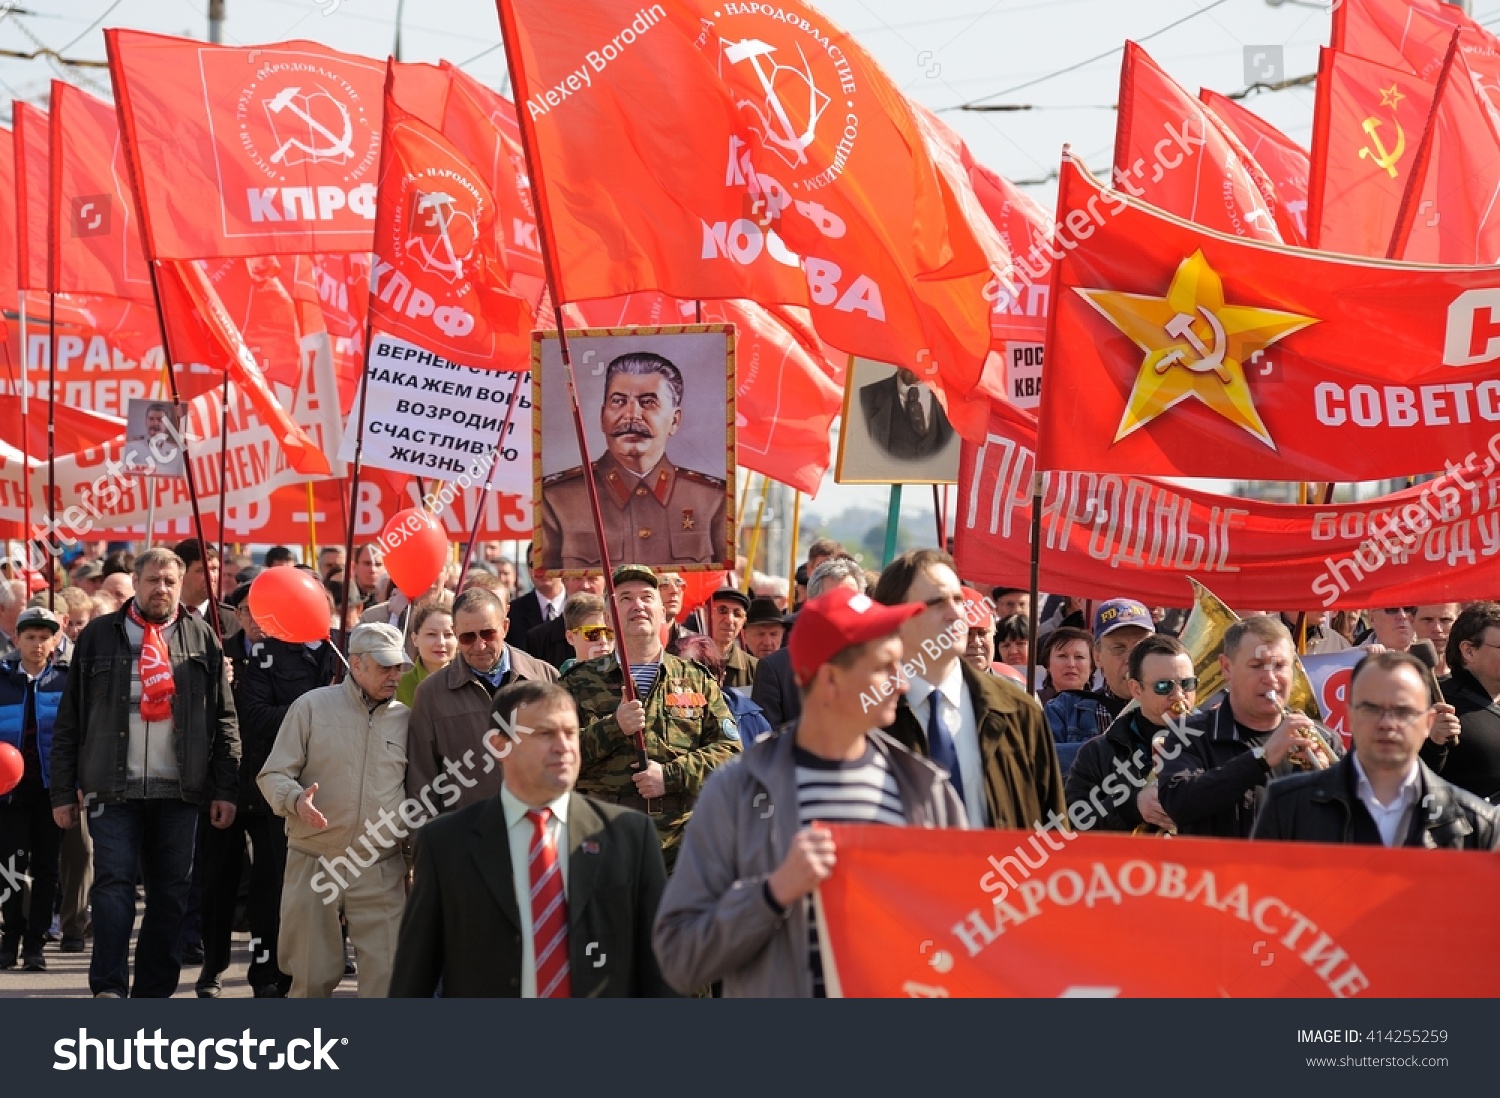 Orel, Russia - May 1, 2016: Communist party demonstration. People carrying red flags and Stalin's portrait